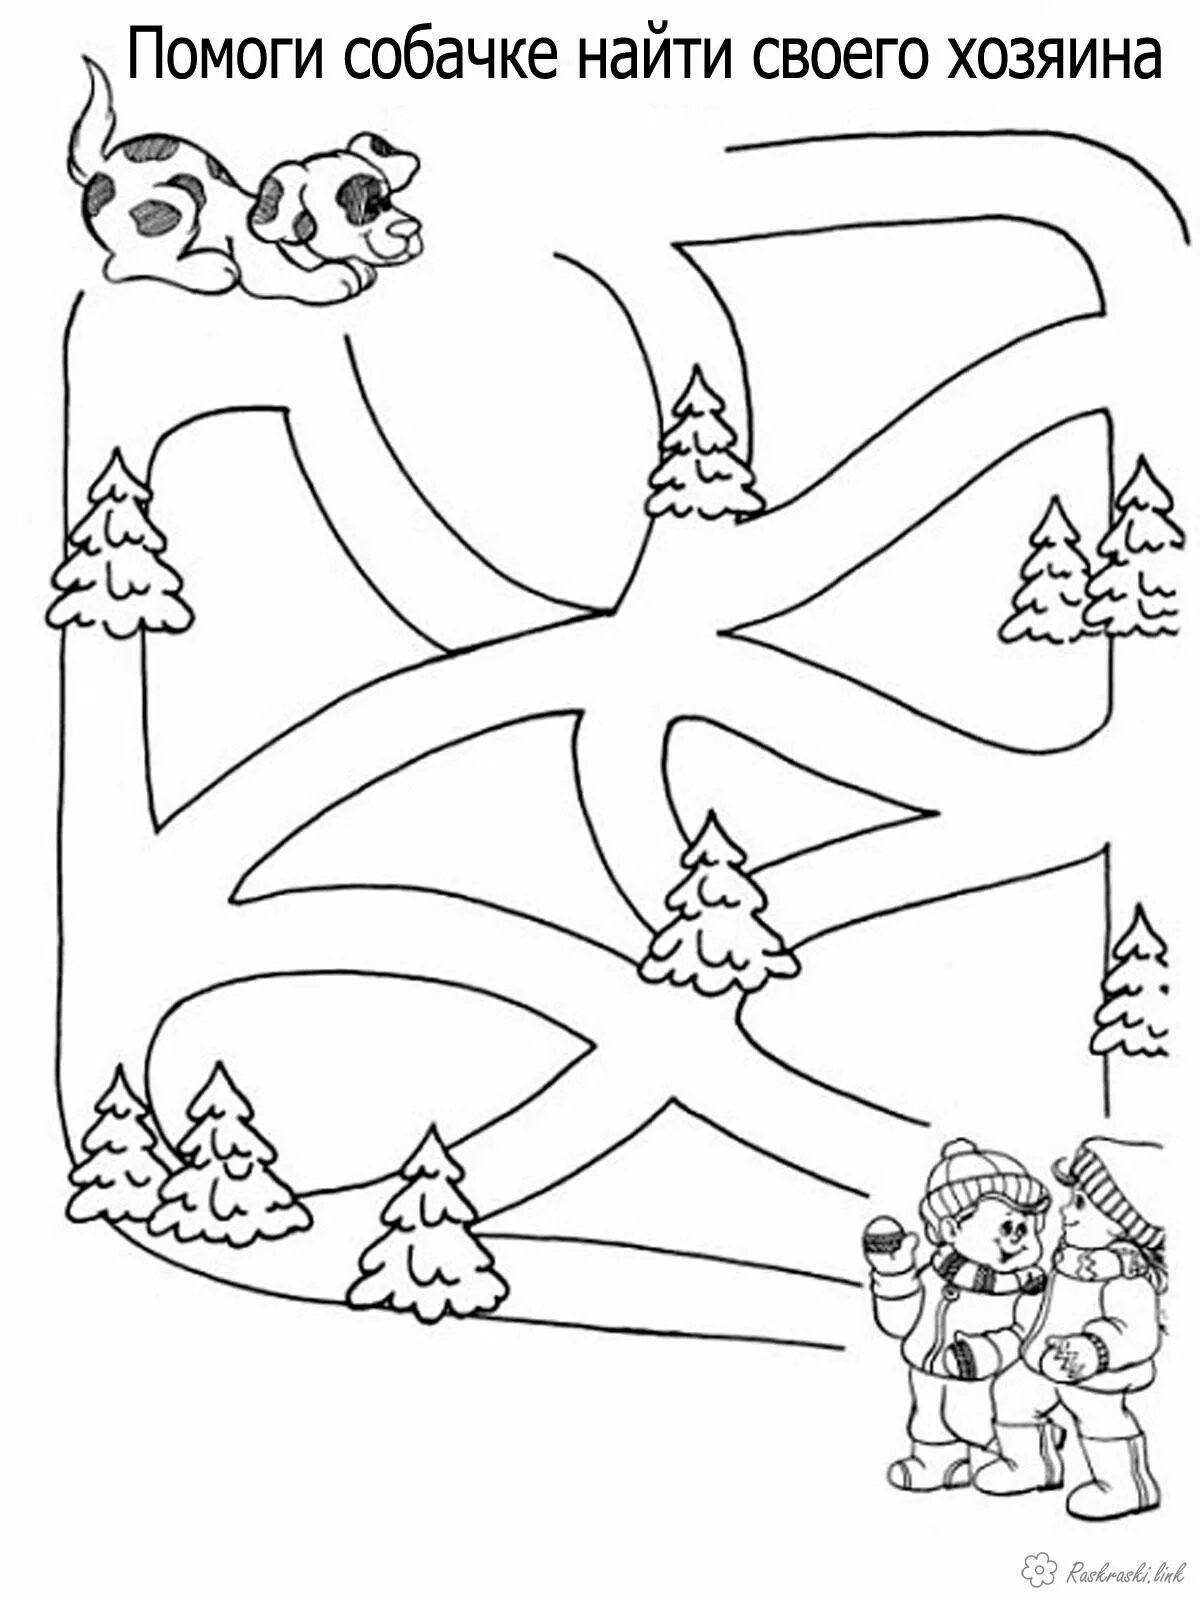 Stimulating maze coloring book for 3-4 year olds